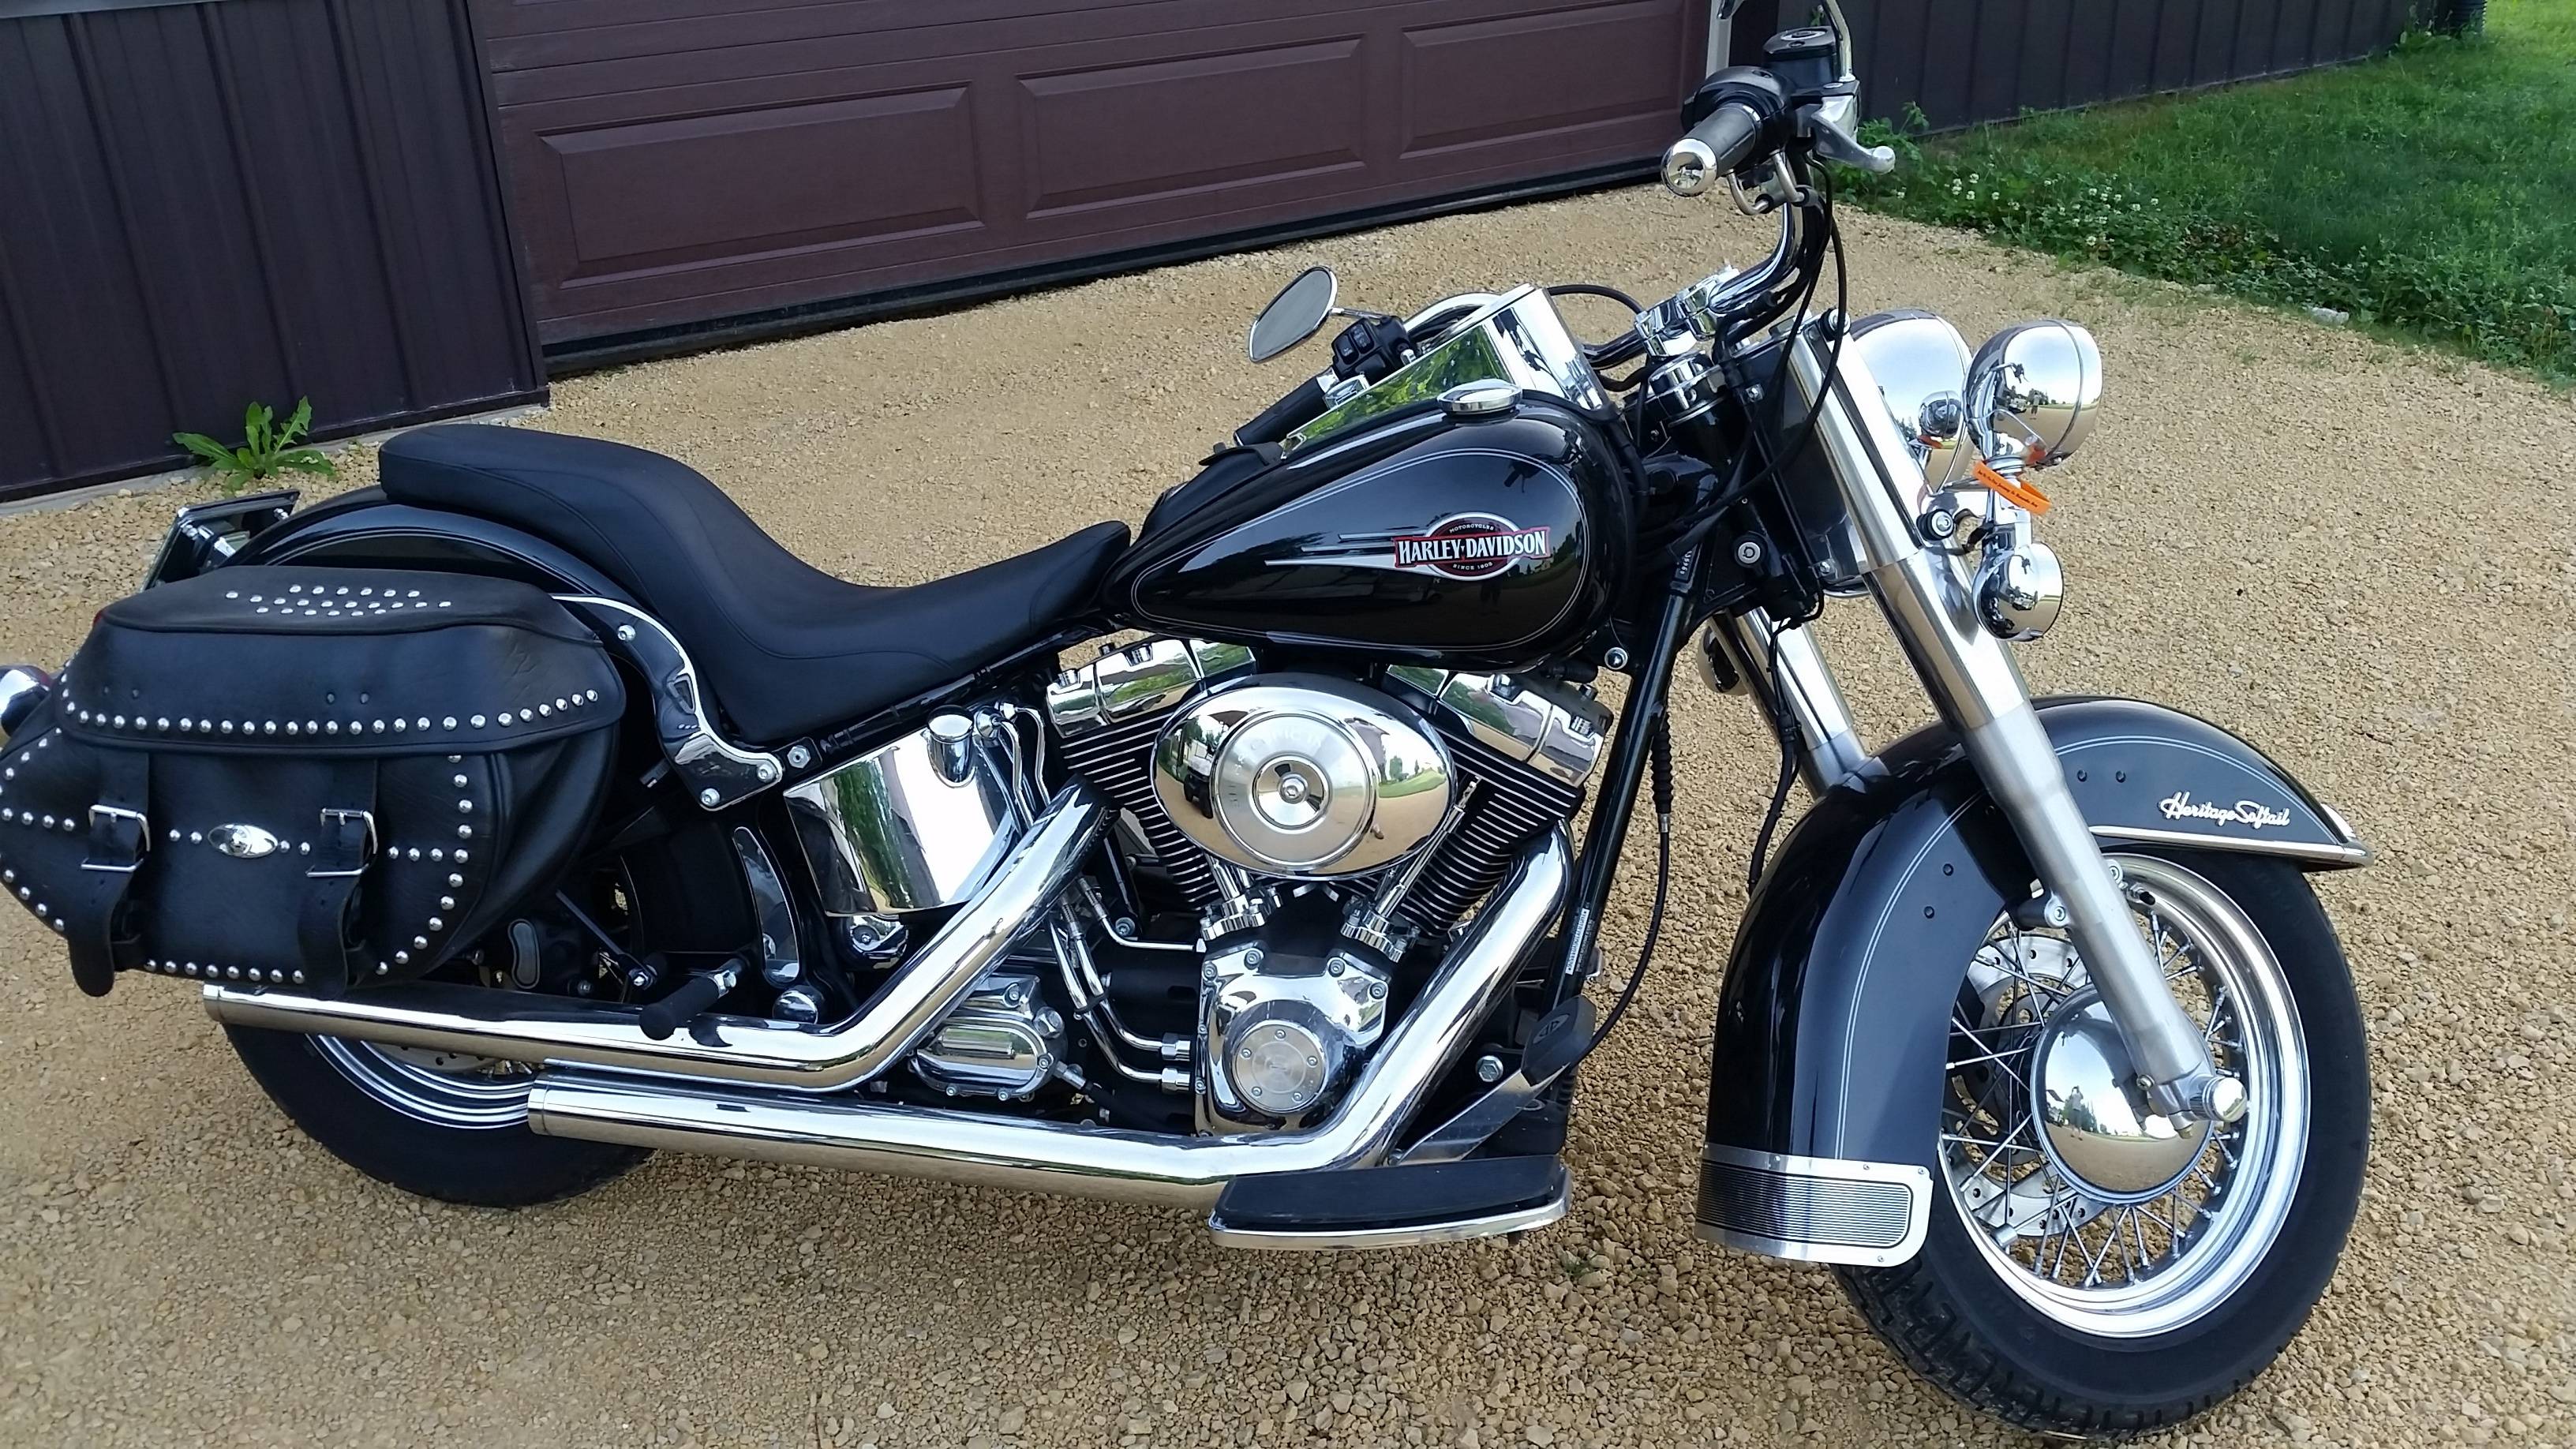 Used 2006 Harley Davidson Heritage Softail Classic Motorcycles In Yankton Sd Stock Number Mx1874